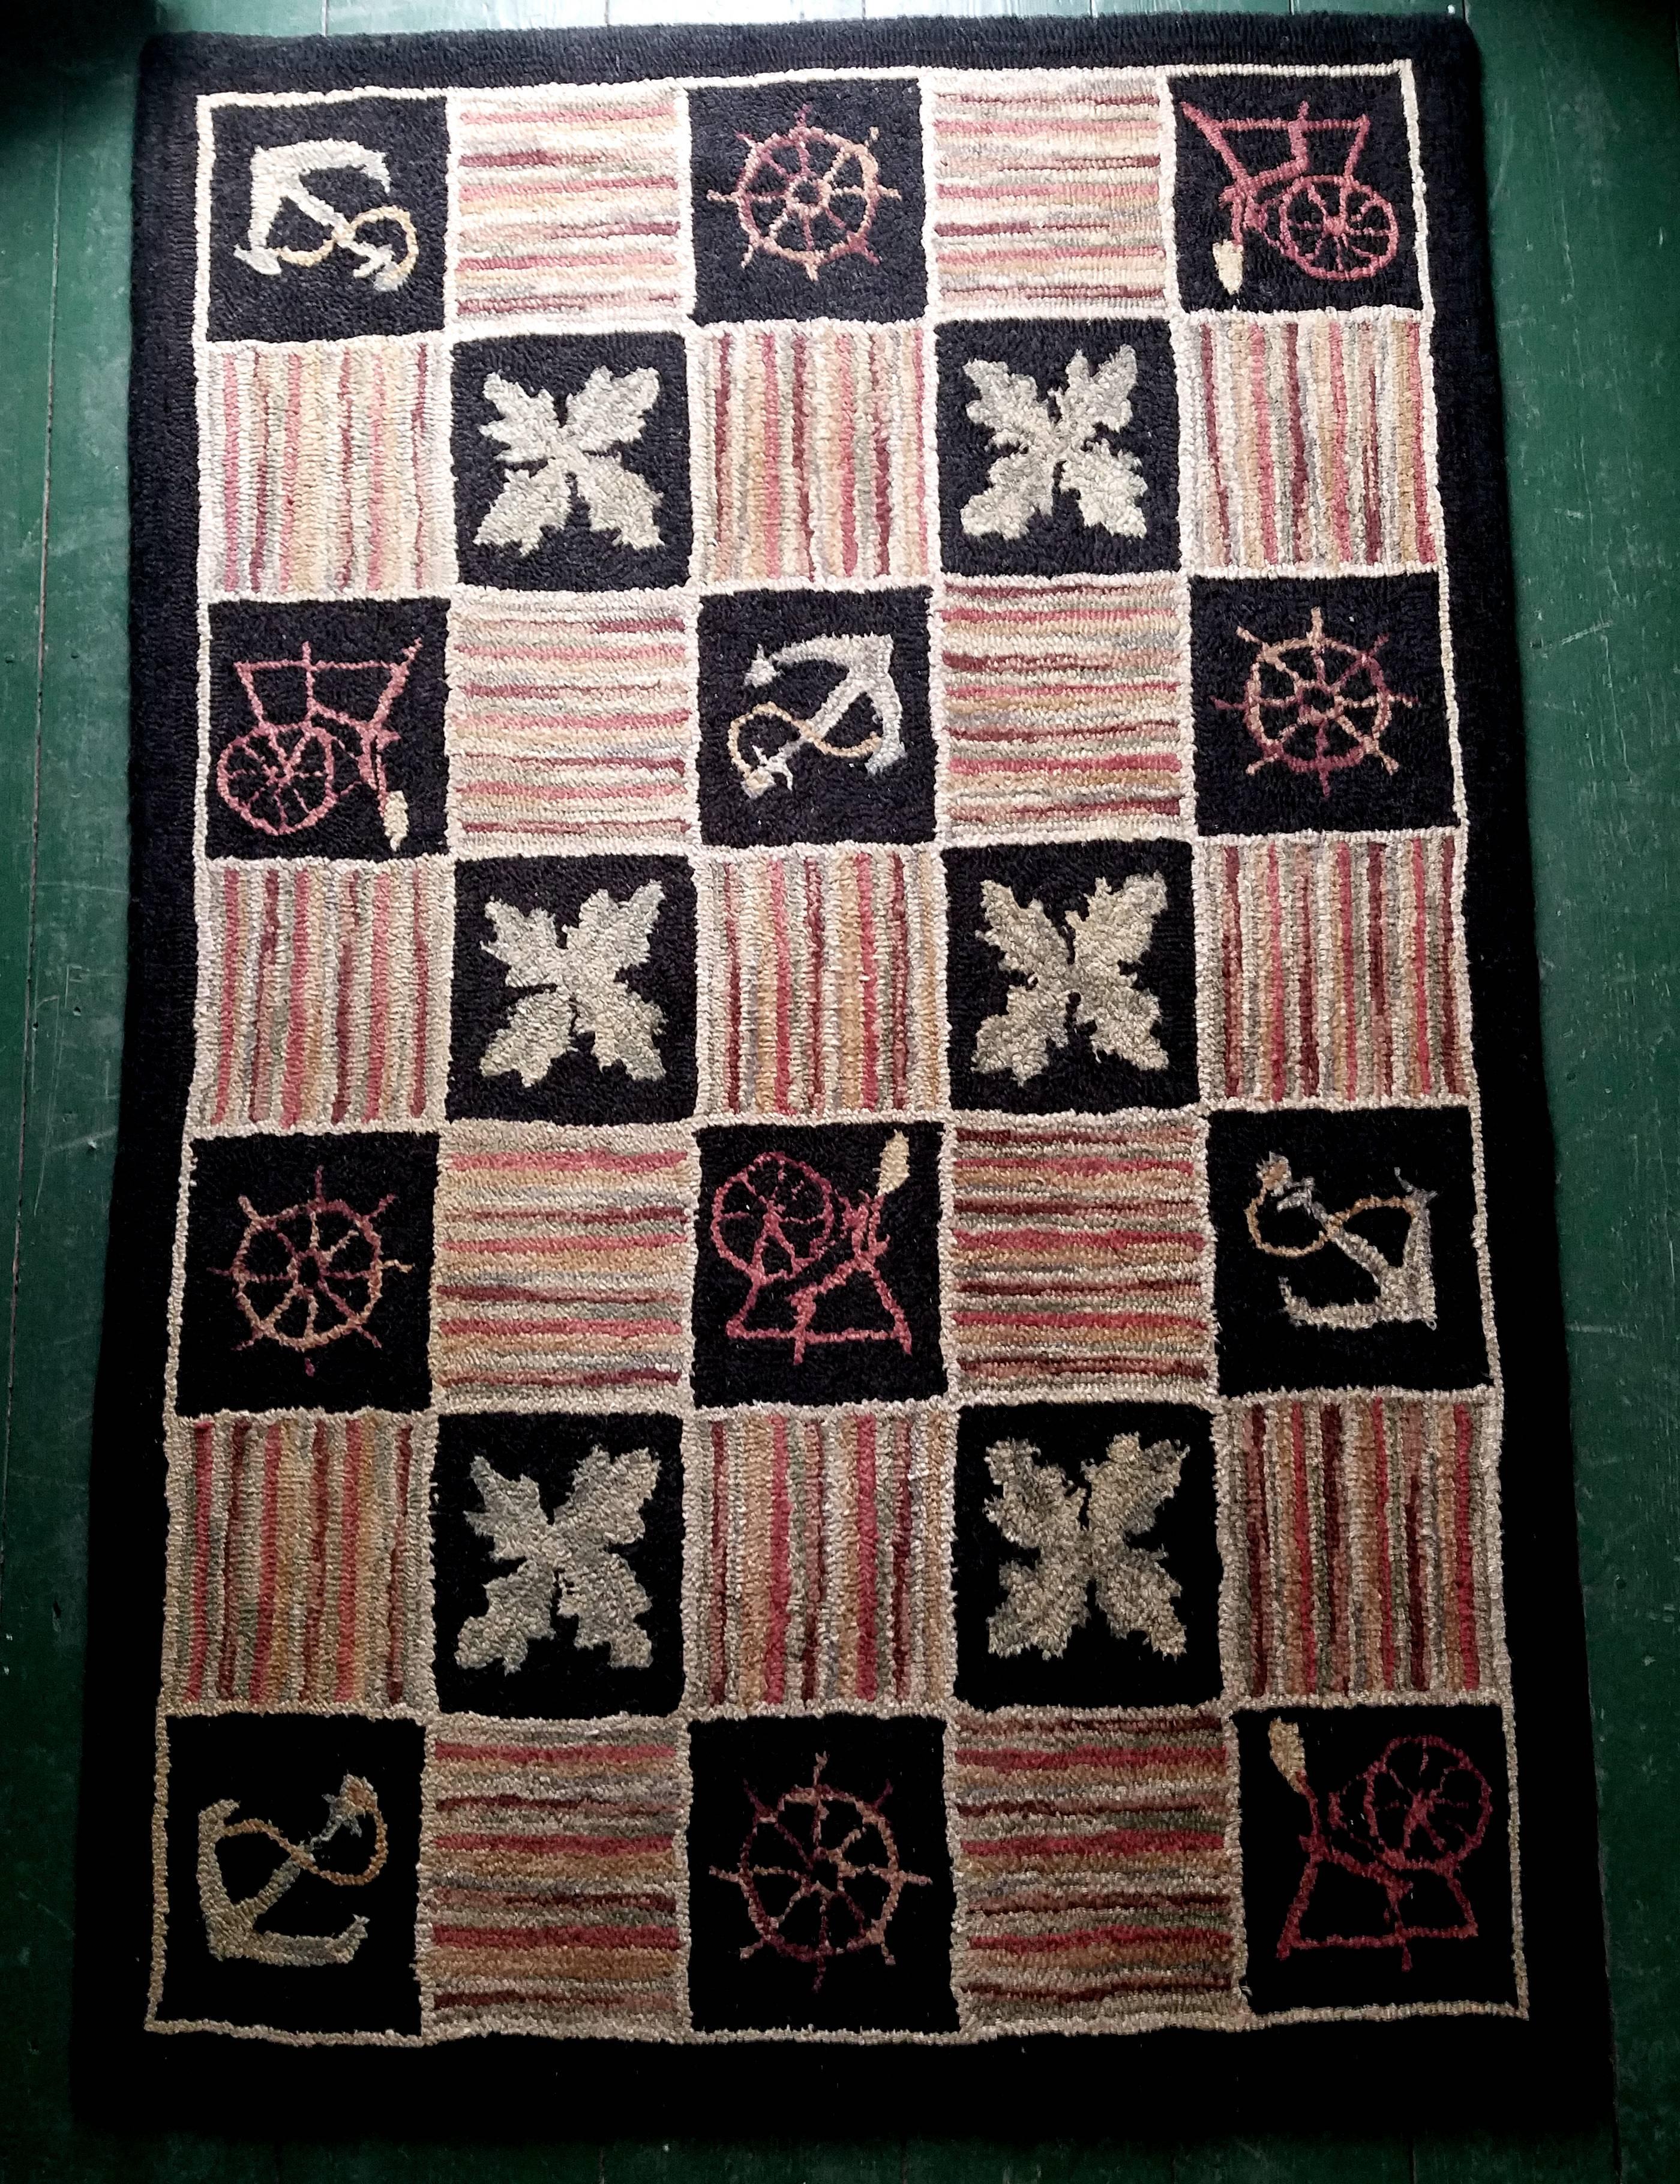 This spectacular vintage American, most likely Maine, hooked rug is extremely visual with a stunning myriad of colors contained within a striped border with spinning wheel and nautical patterned weaves. These squares are outlined in a thin border of